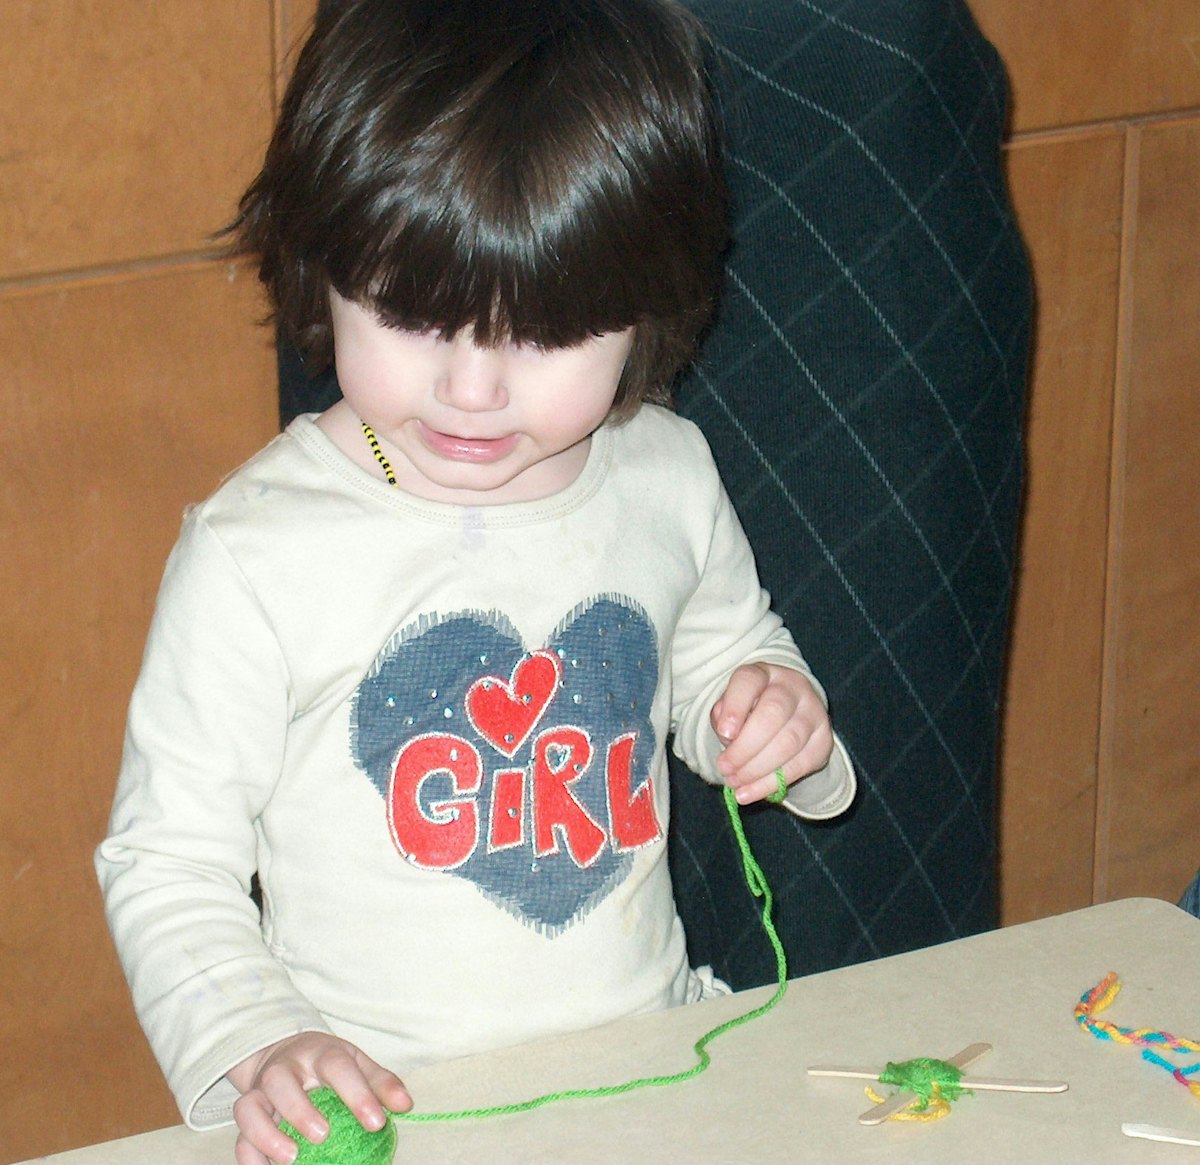 Jordan weaves a "God's eye" at the crafts table during the Family Virtues Breakfast in Winnipeg.